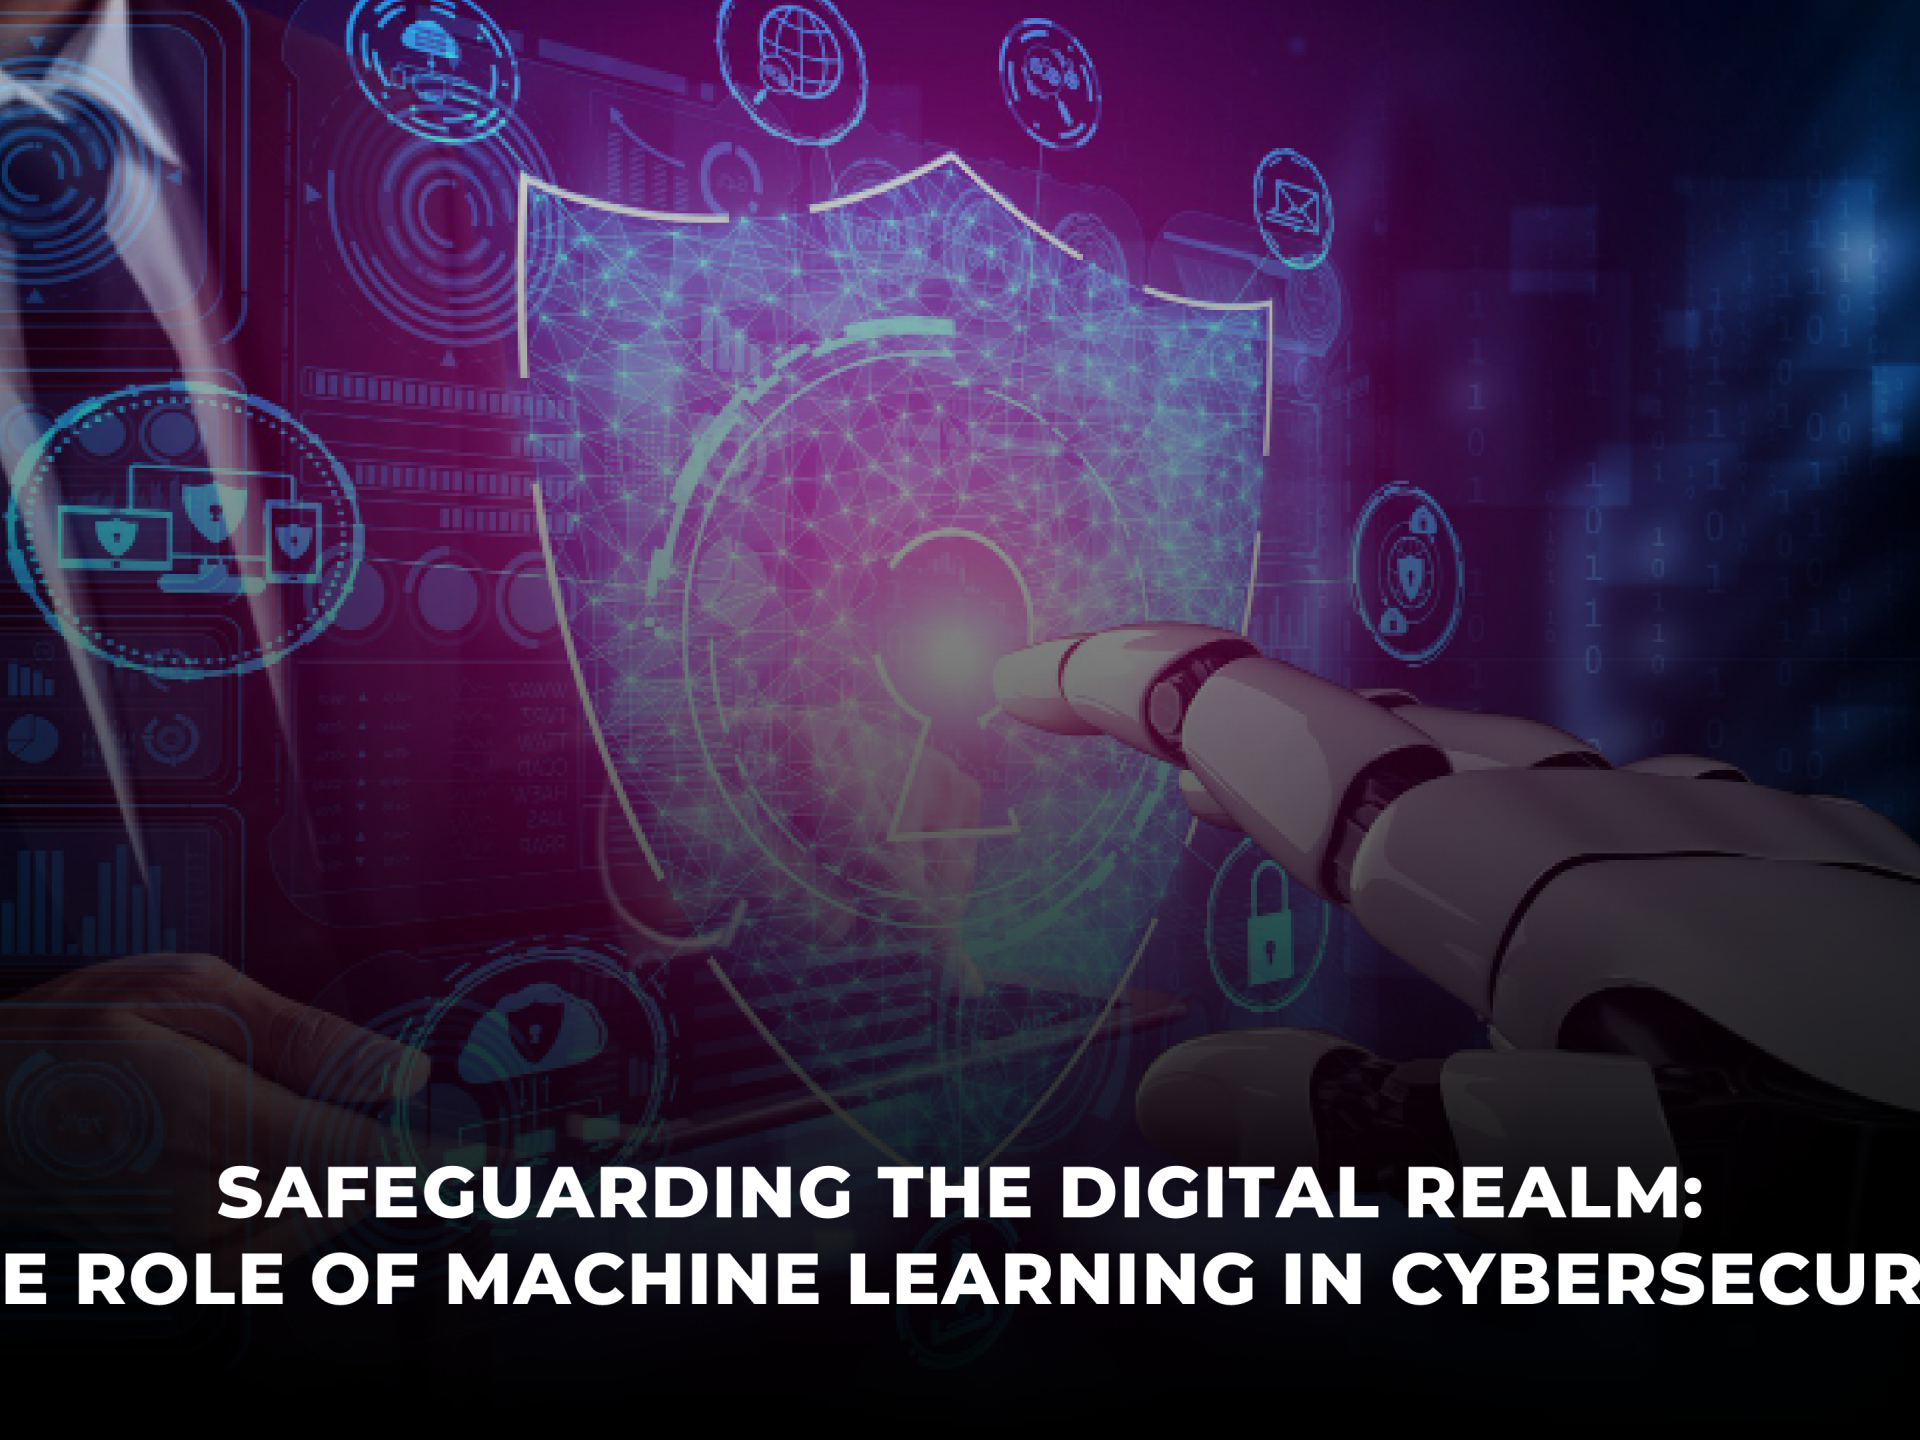 Safeguarding the Digital Realm The Role of Machine Learning in Cybersecurity